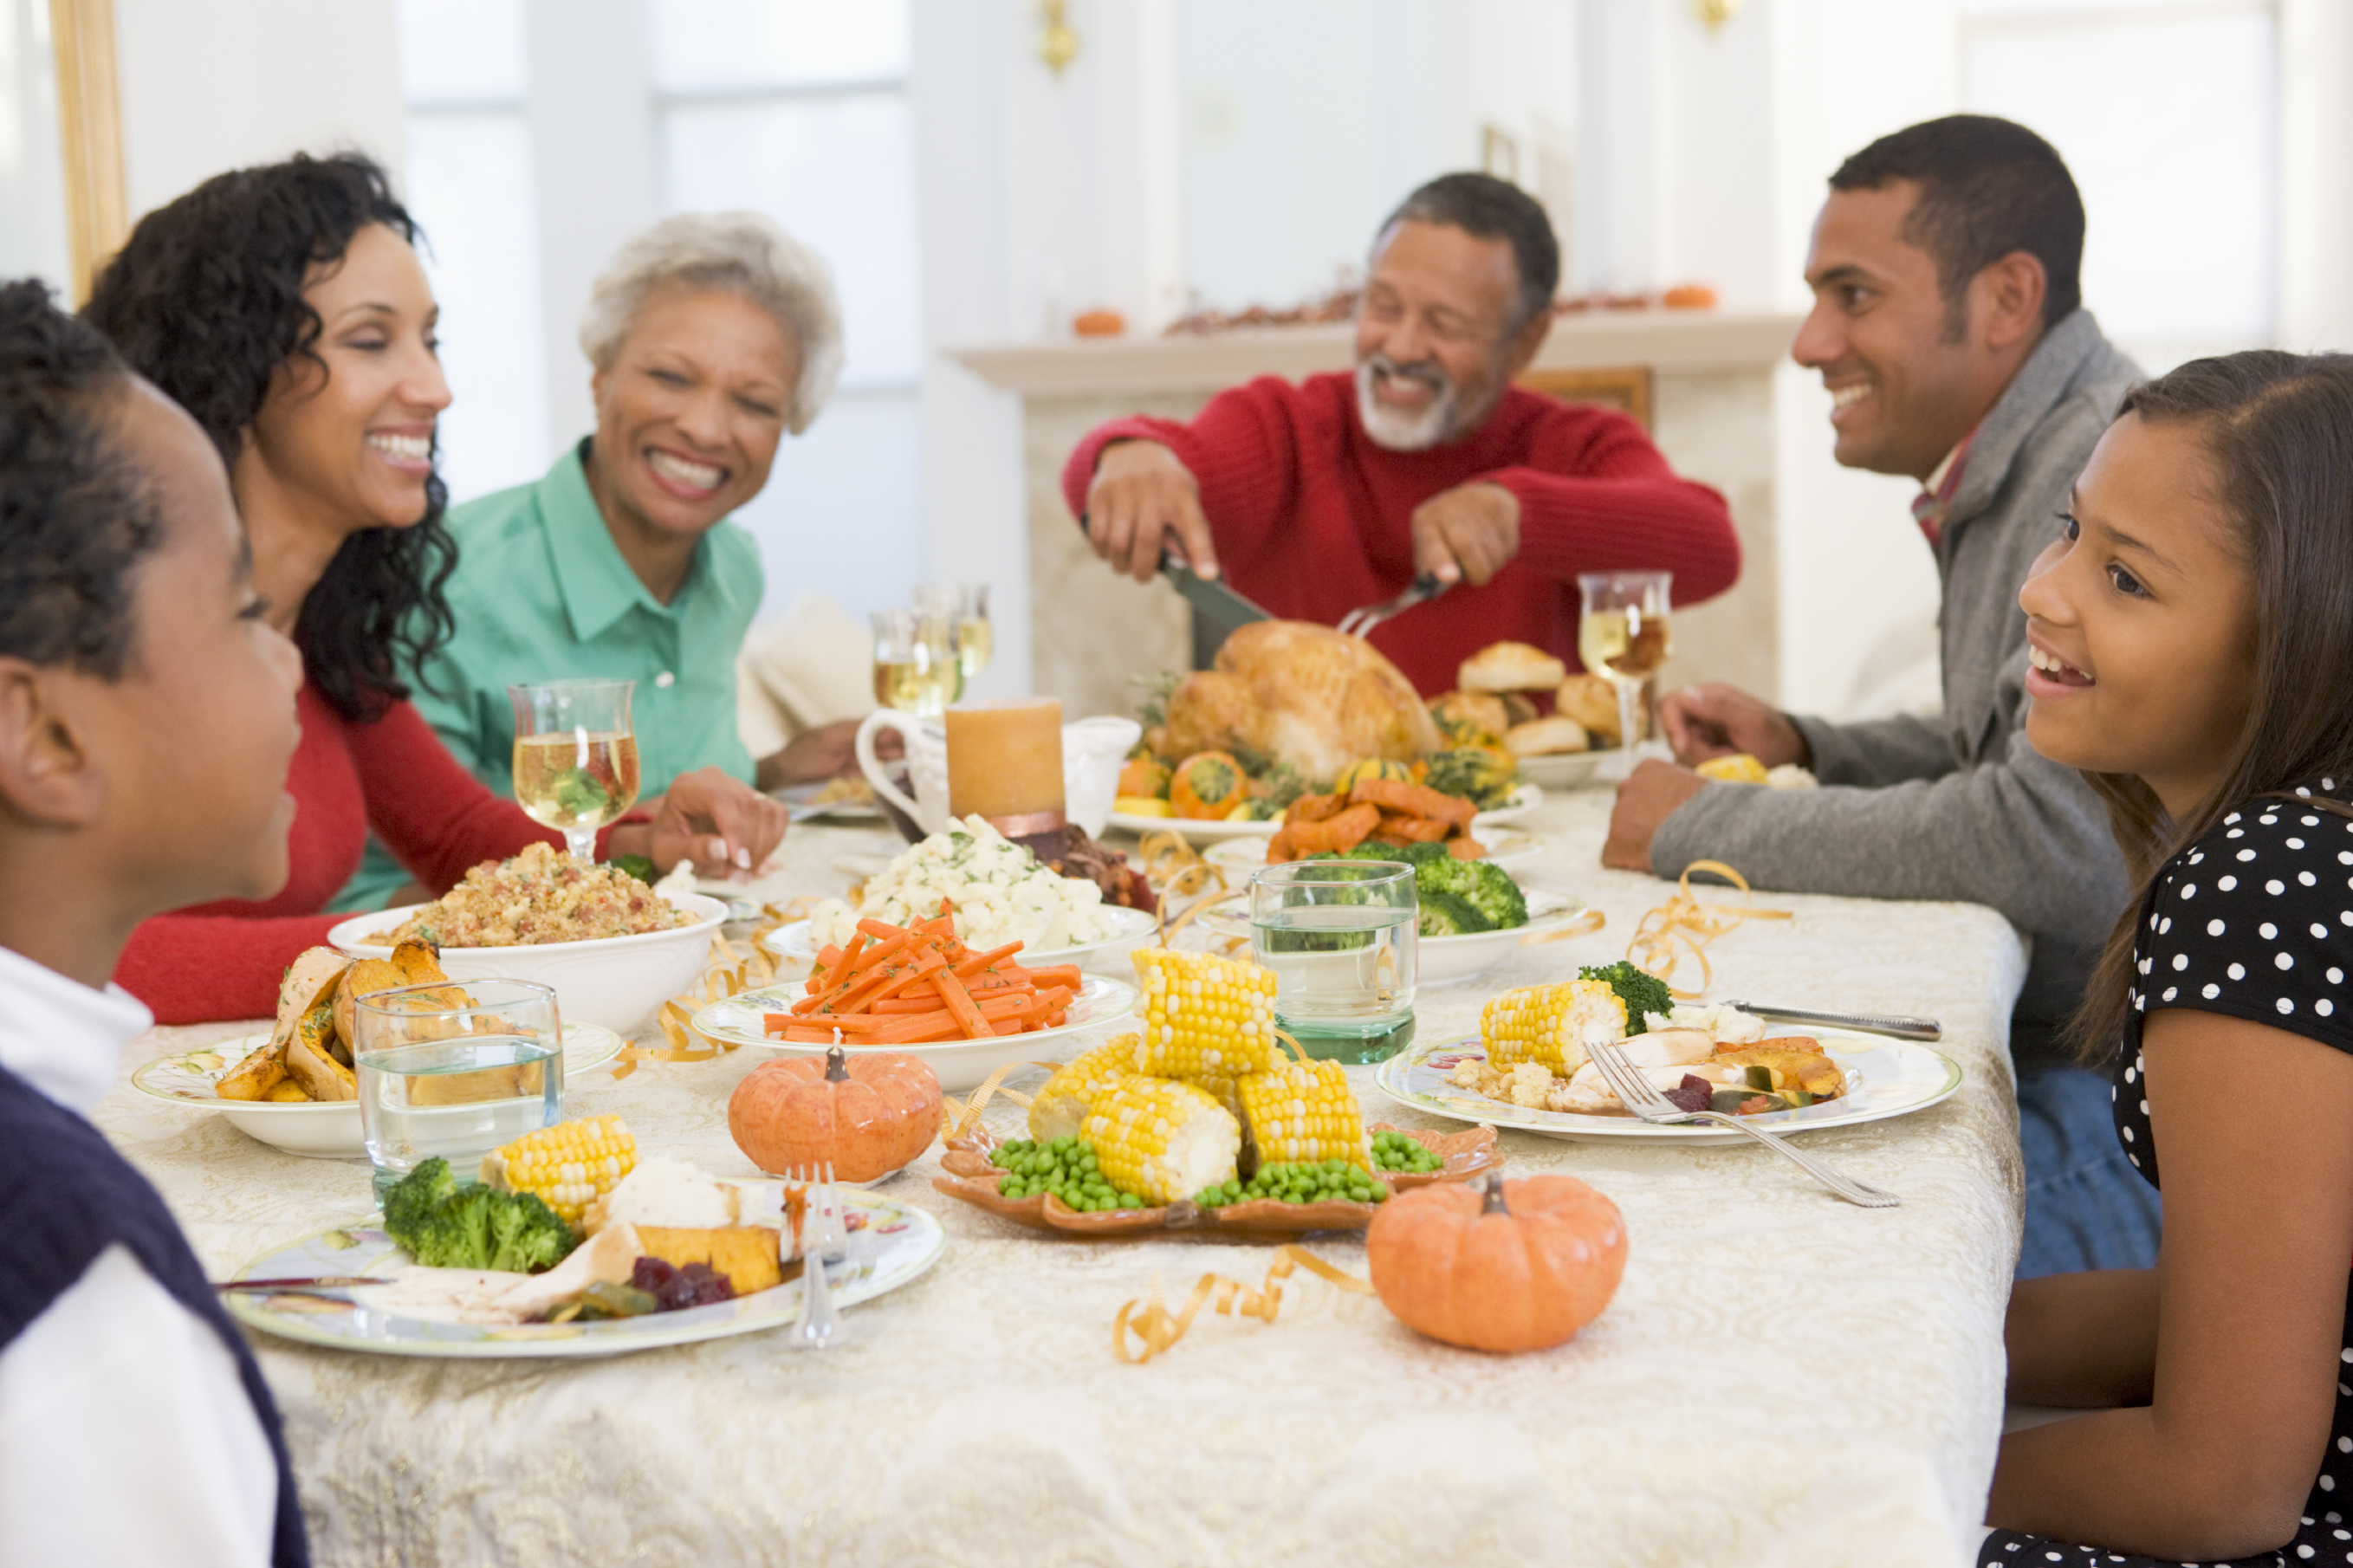 How to cope with a dysfunctional family holiday gathering - CBS News